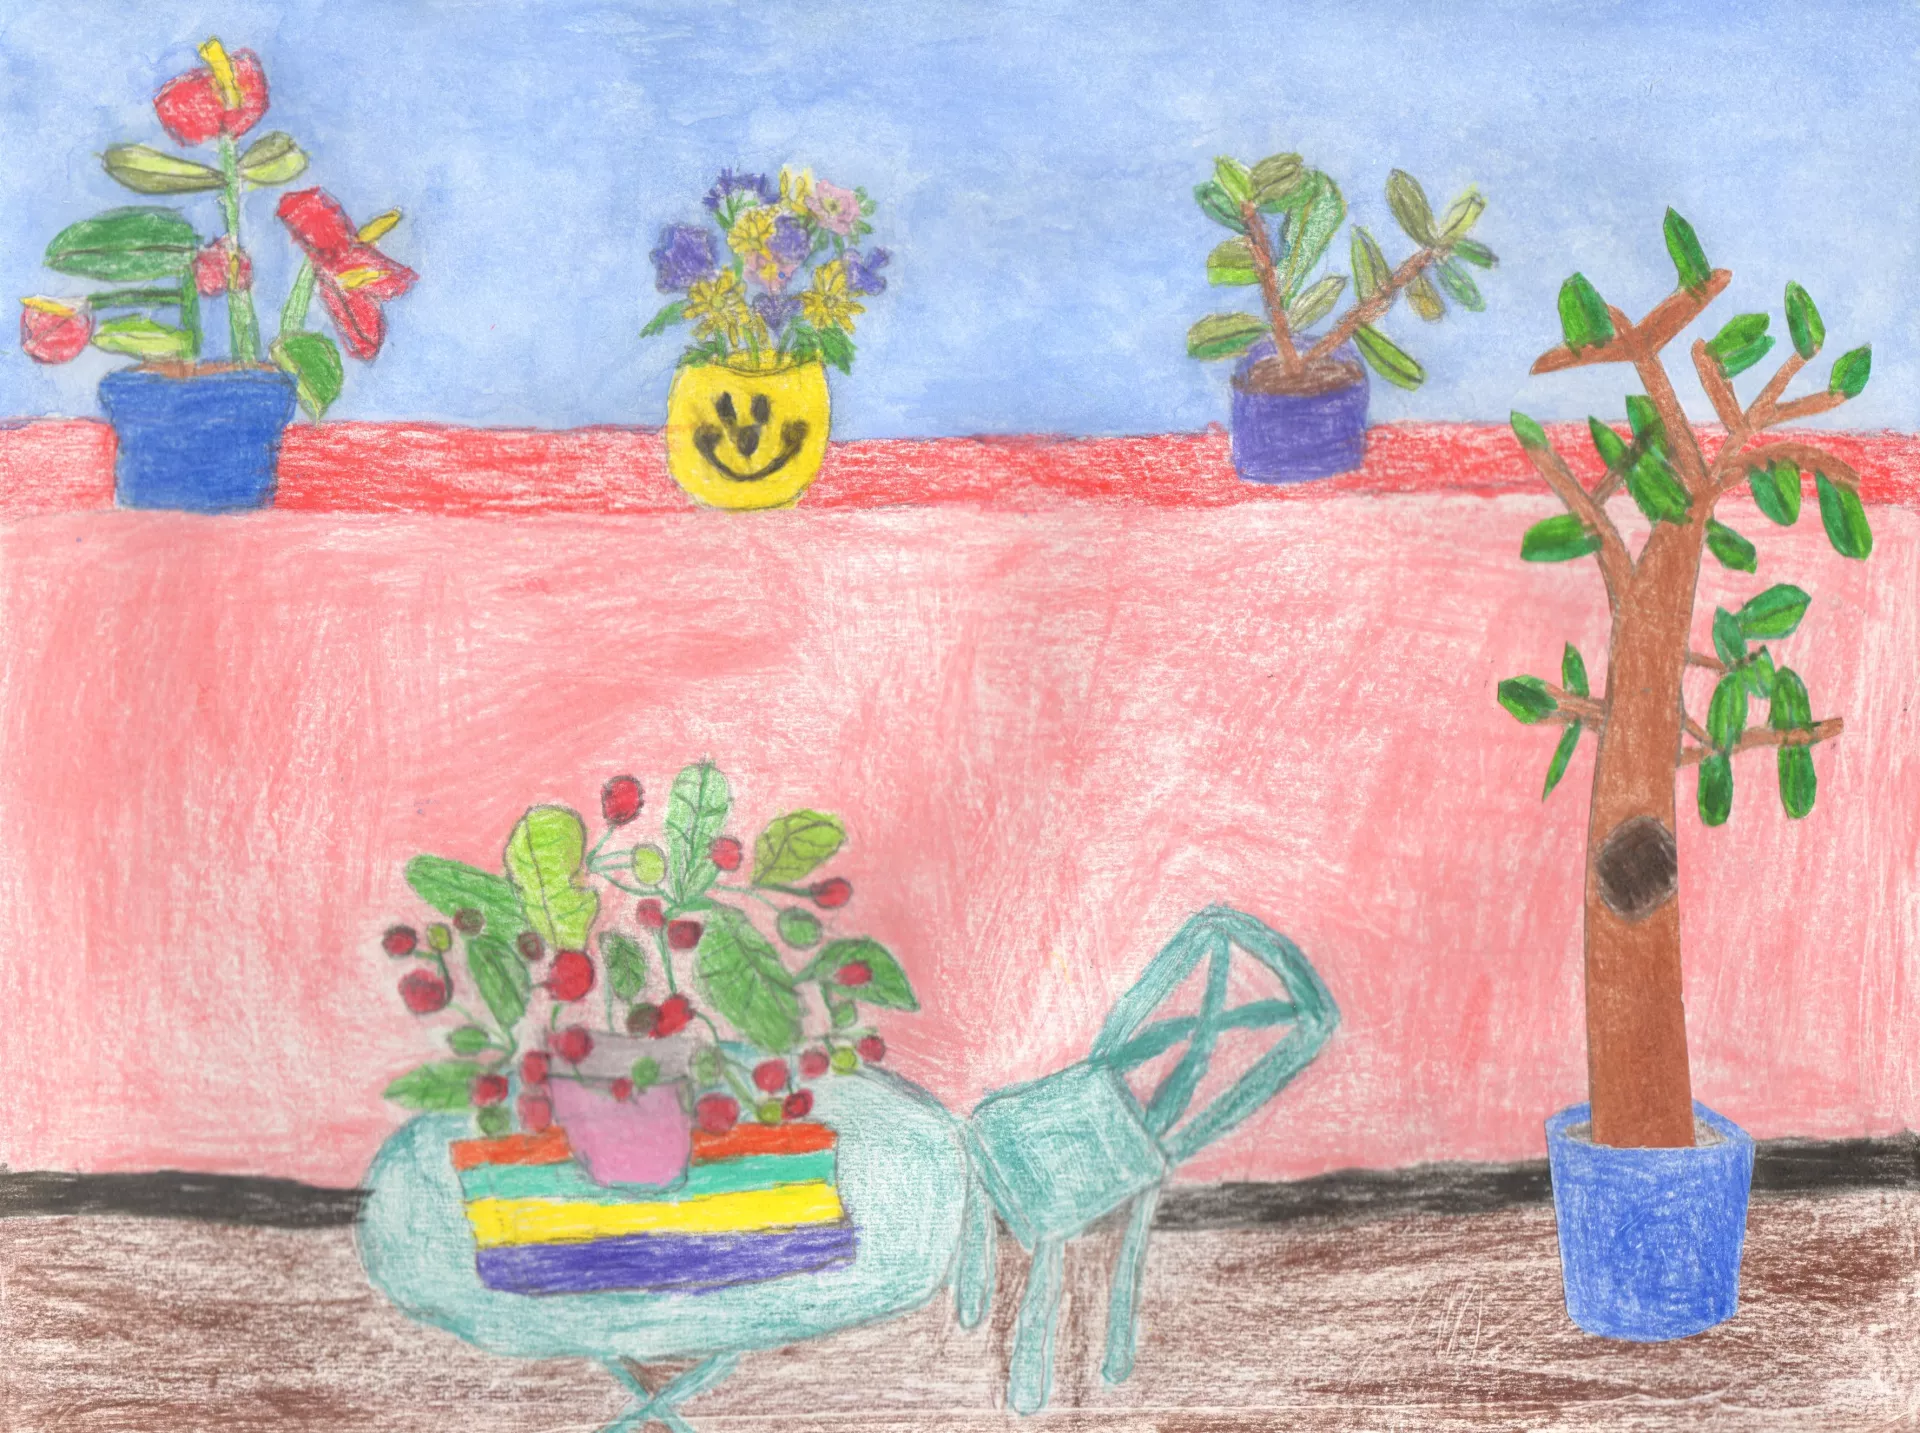 Elisa Jerugim Cherry Tomatoes on my Balcony, 2022 A small table and chair on a pink patio surrounded by plants.  Mixed media on paper, 9" x 12"